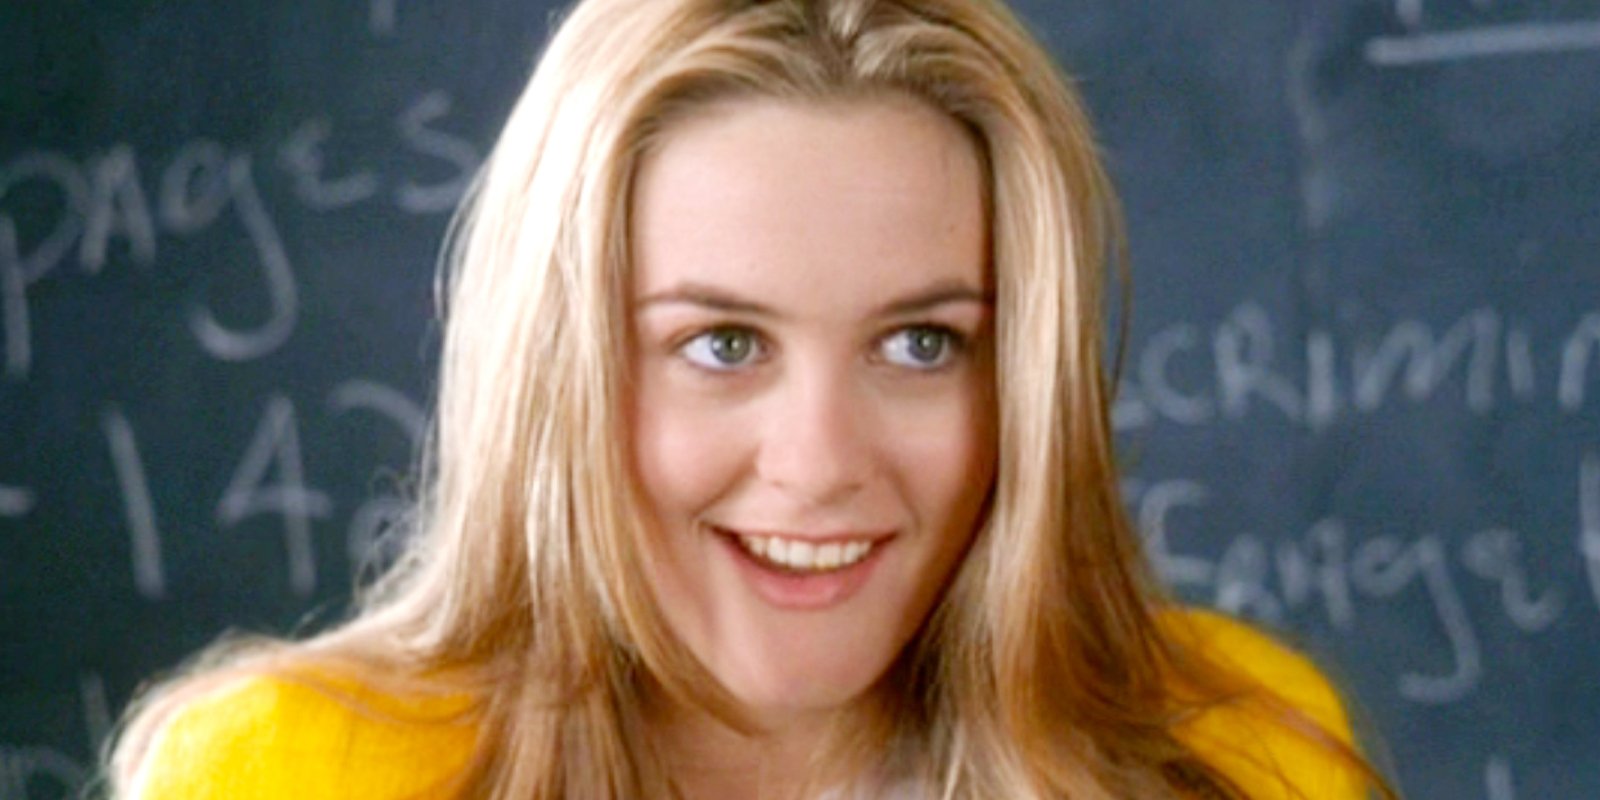 Alicia Silverstone in the motion picture 'Clueless' which debuted in 1995.